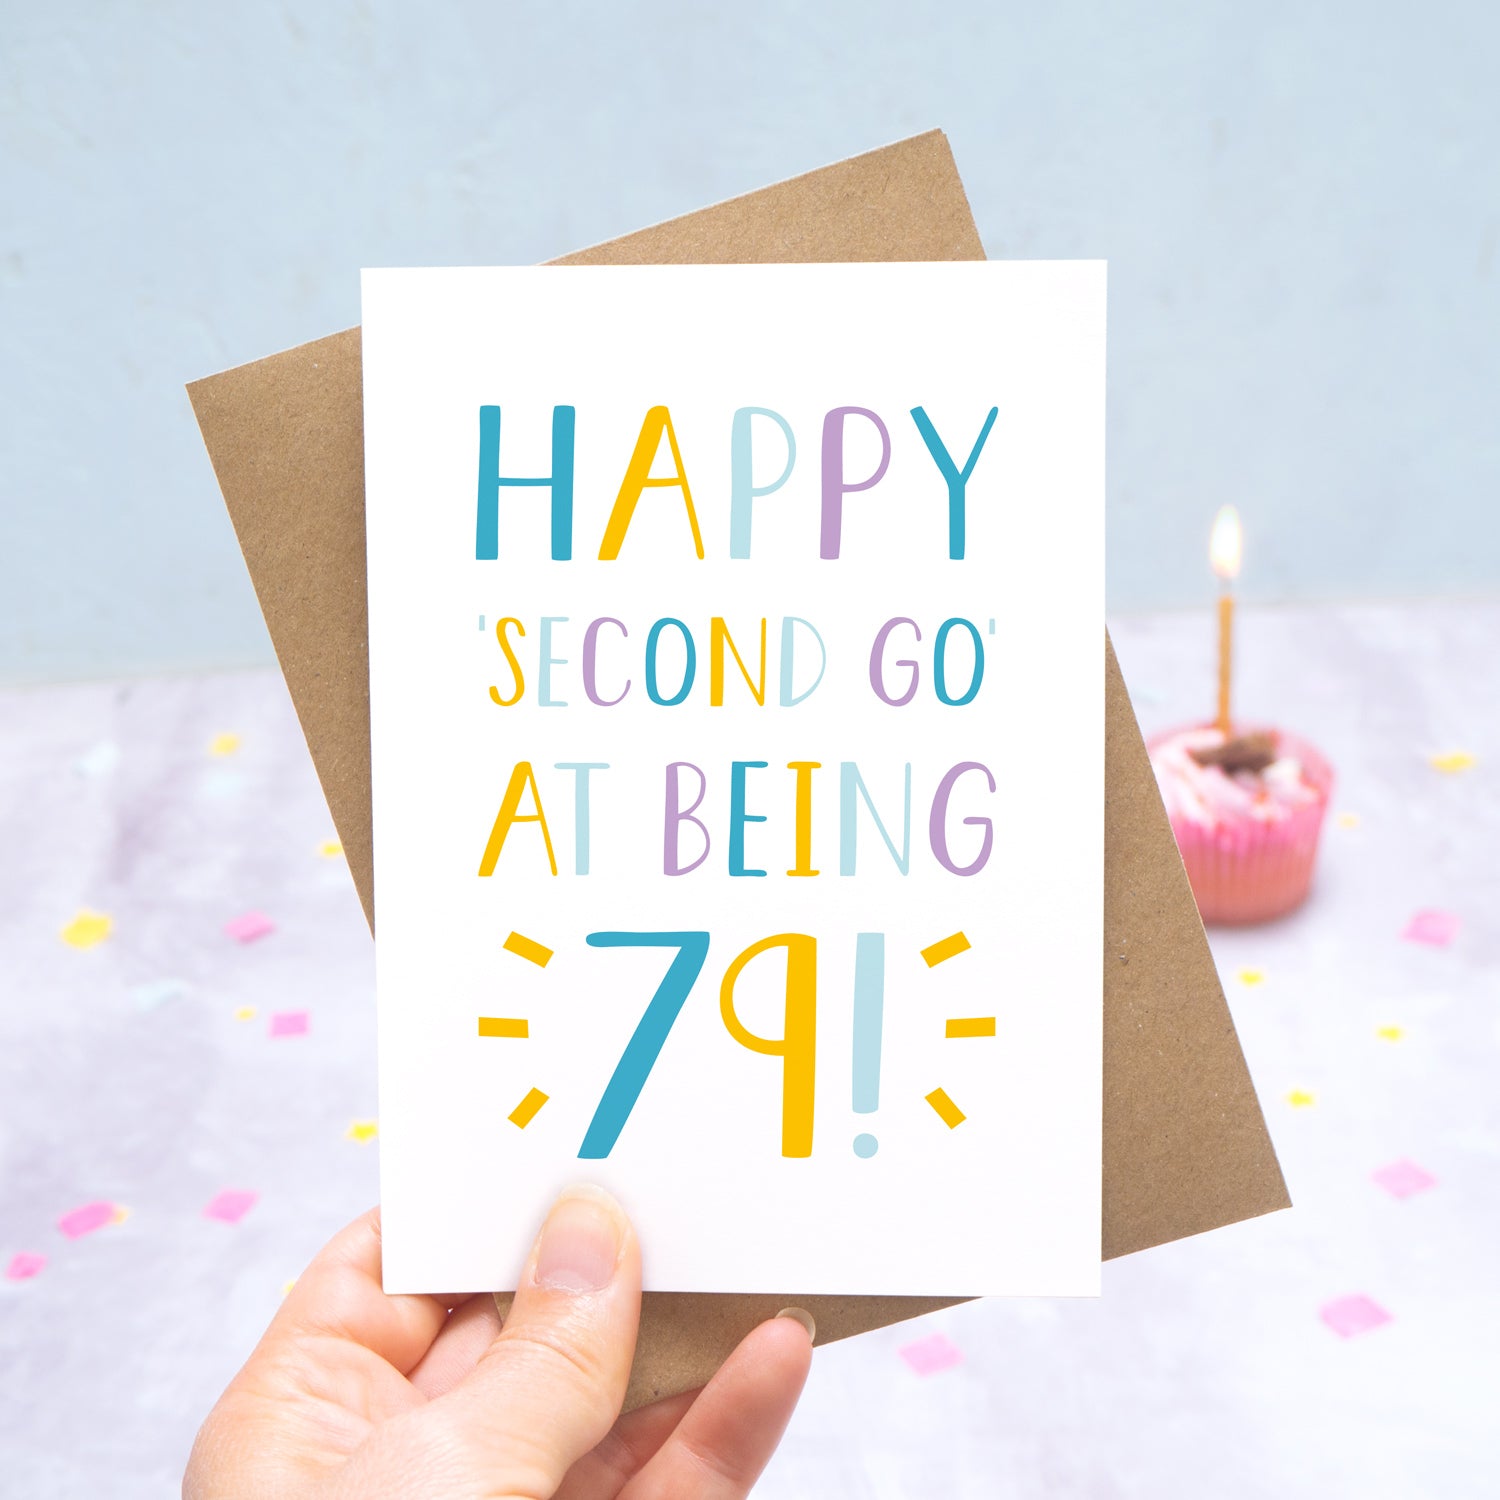 Happy second go at being 79 - milestone age card in blue, yellow and purple photographed on a grey and blue background with a cupcake and burning candle.